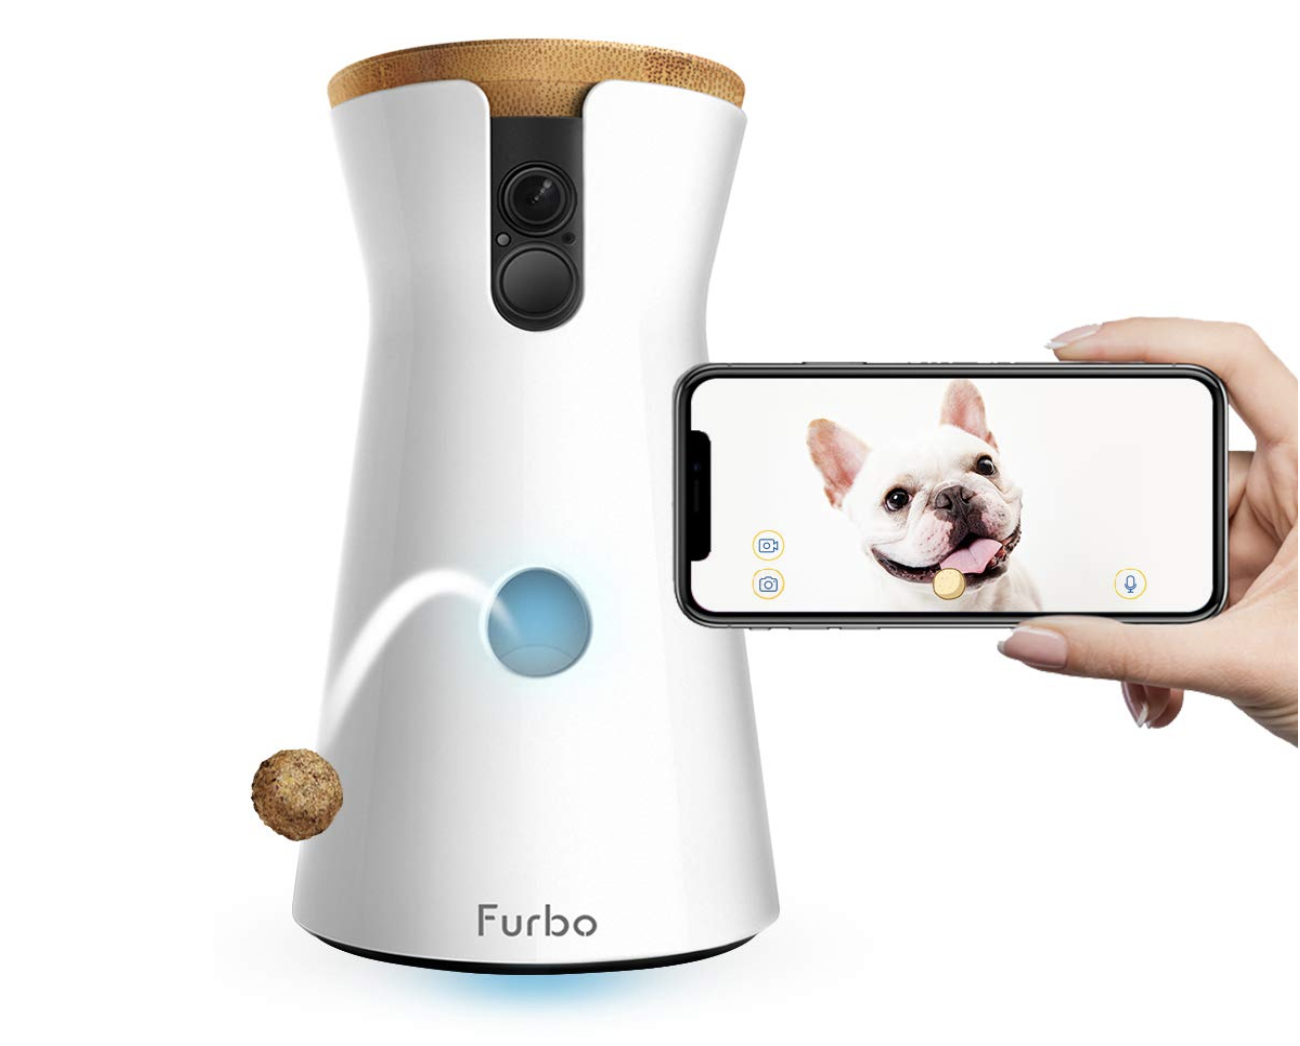 Furbo Dog Camera: Treat Tossing, Full HD Wifi Pet Camera With 2-Way Audio - $134.99 (Down From $199.00)